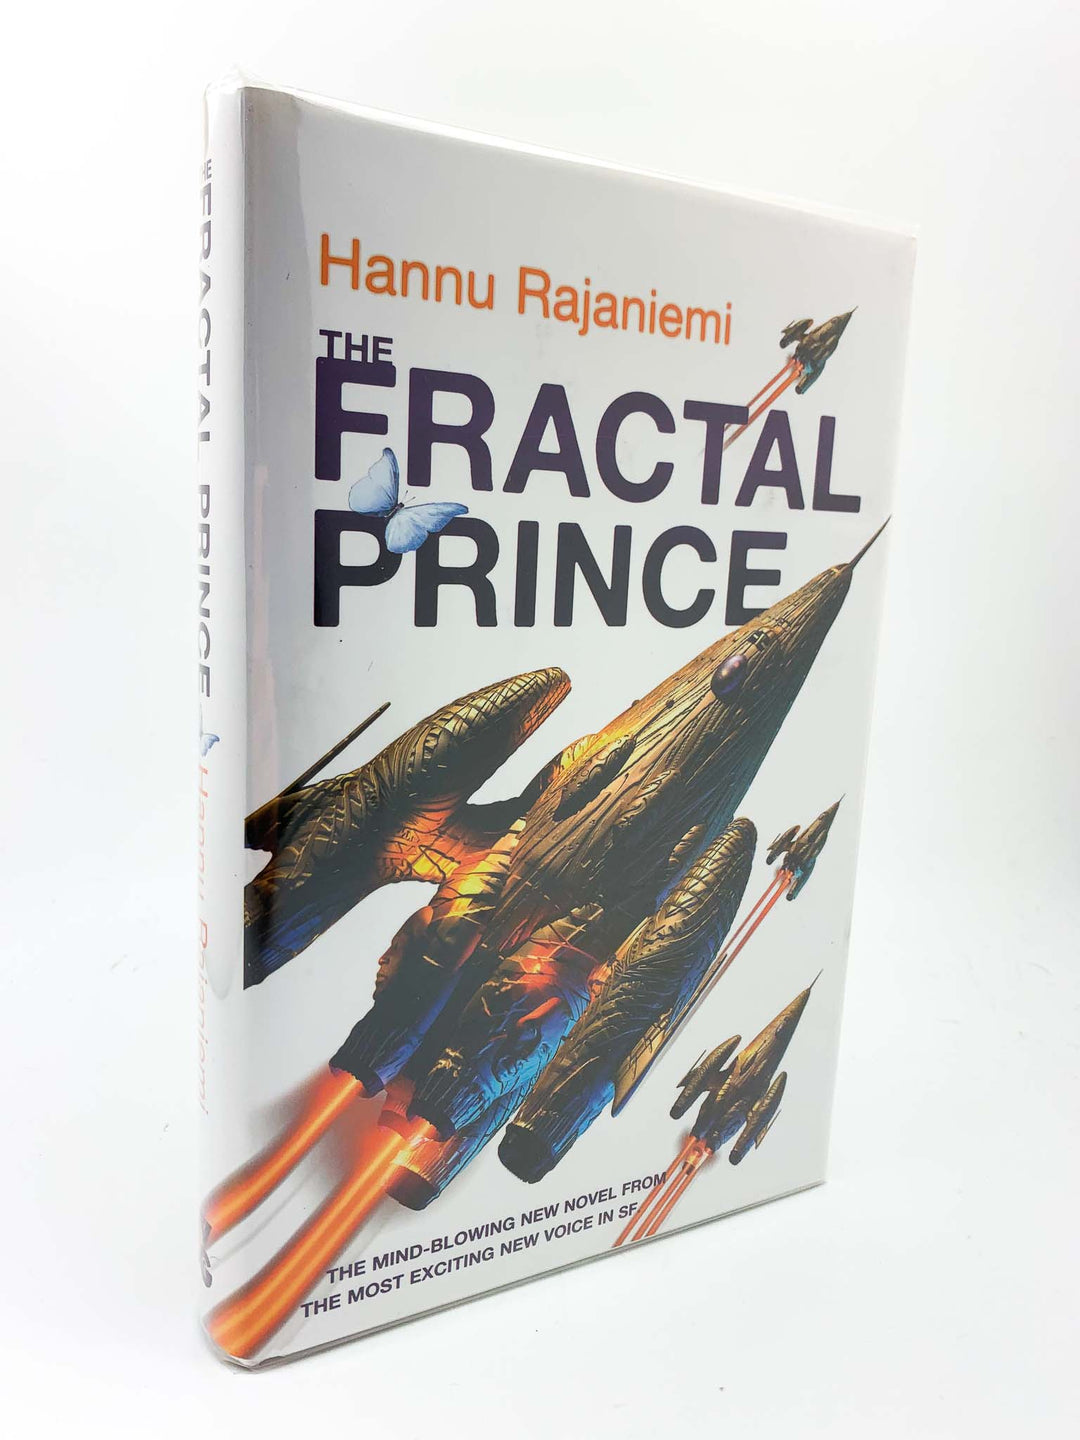 Rajaniemi, Hannu - The Quantum Thief trilogy : The Quantum Thief, The Fractal Prince & The Causal Angel - SIGNED